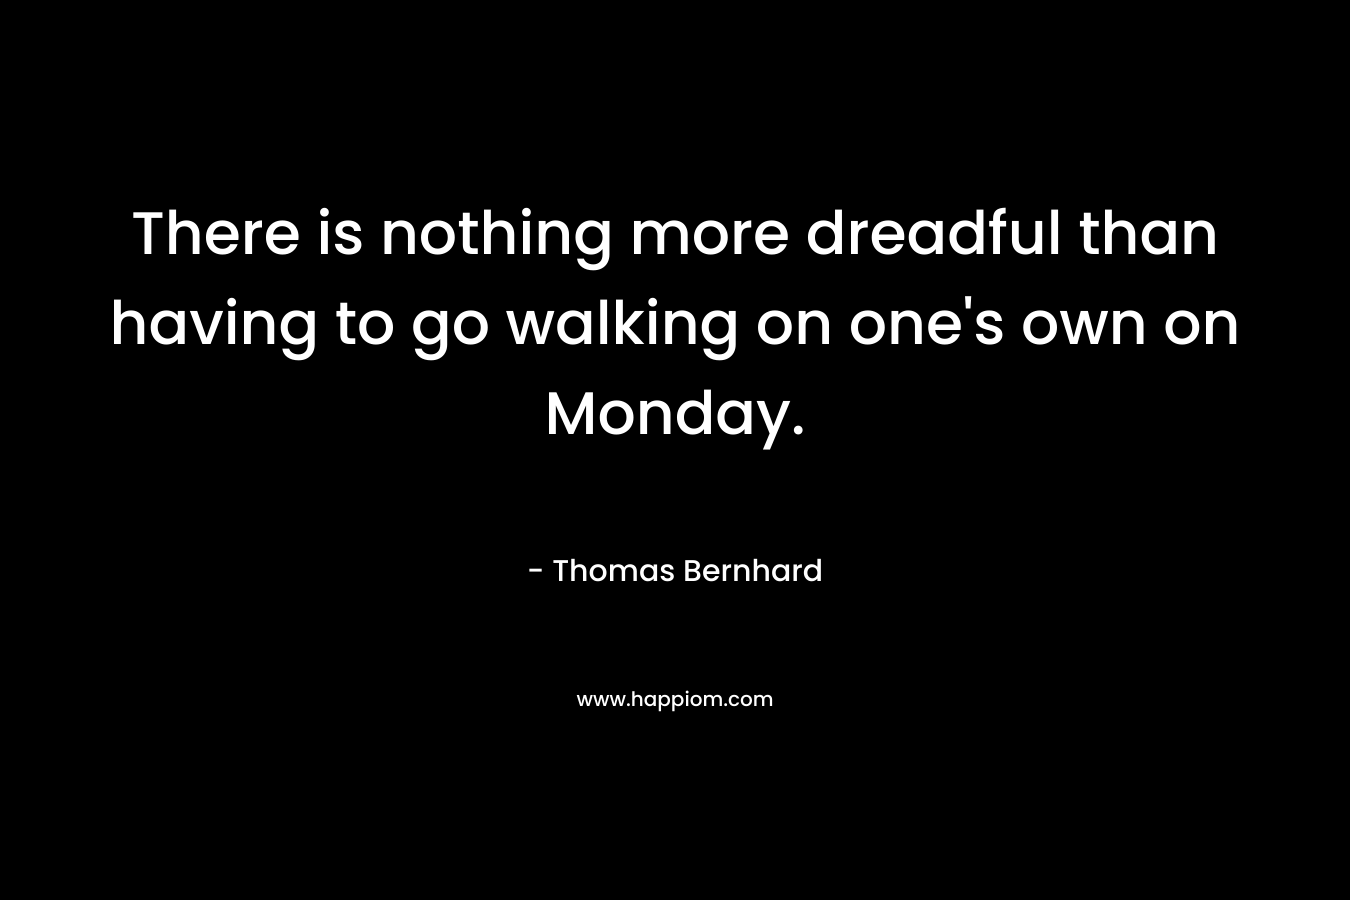 There is nothing more dreadful than having to go walking on one's own on Monday.